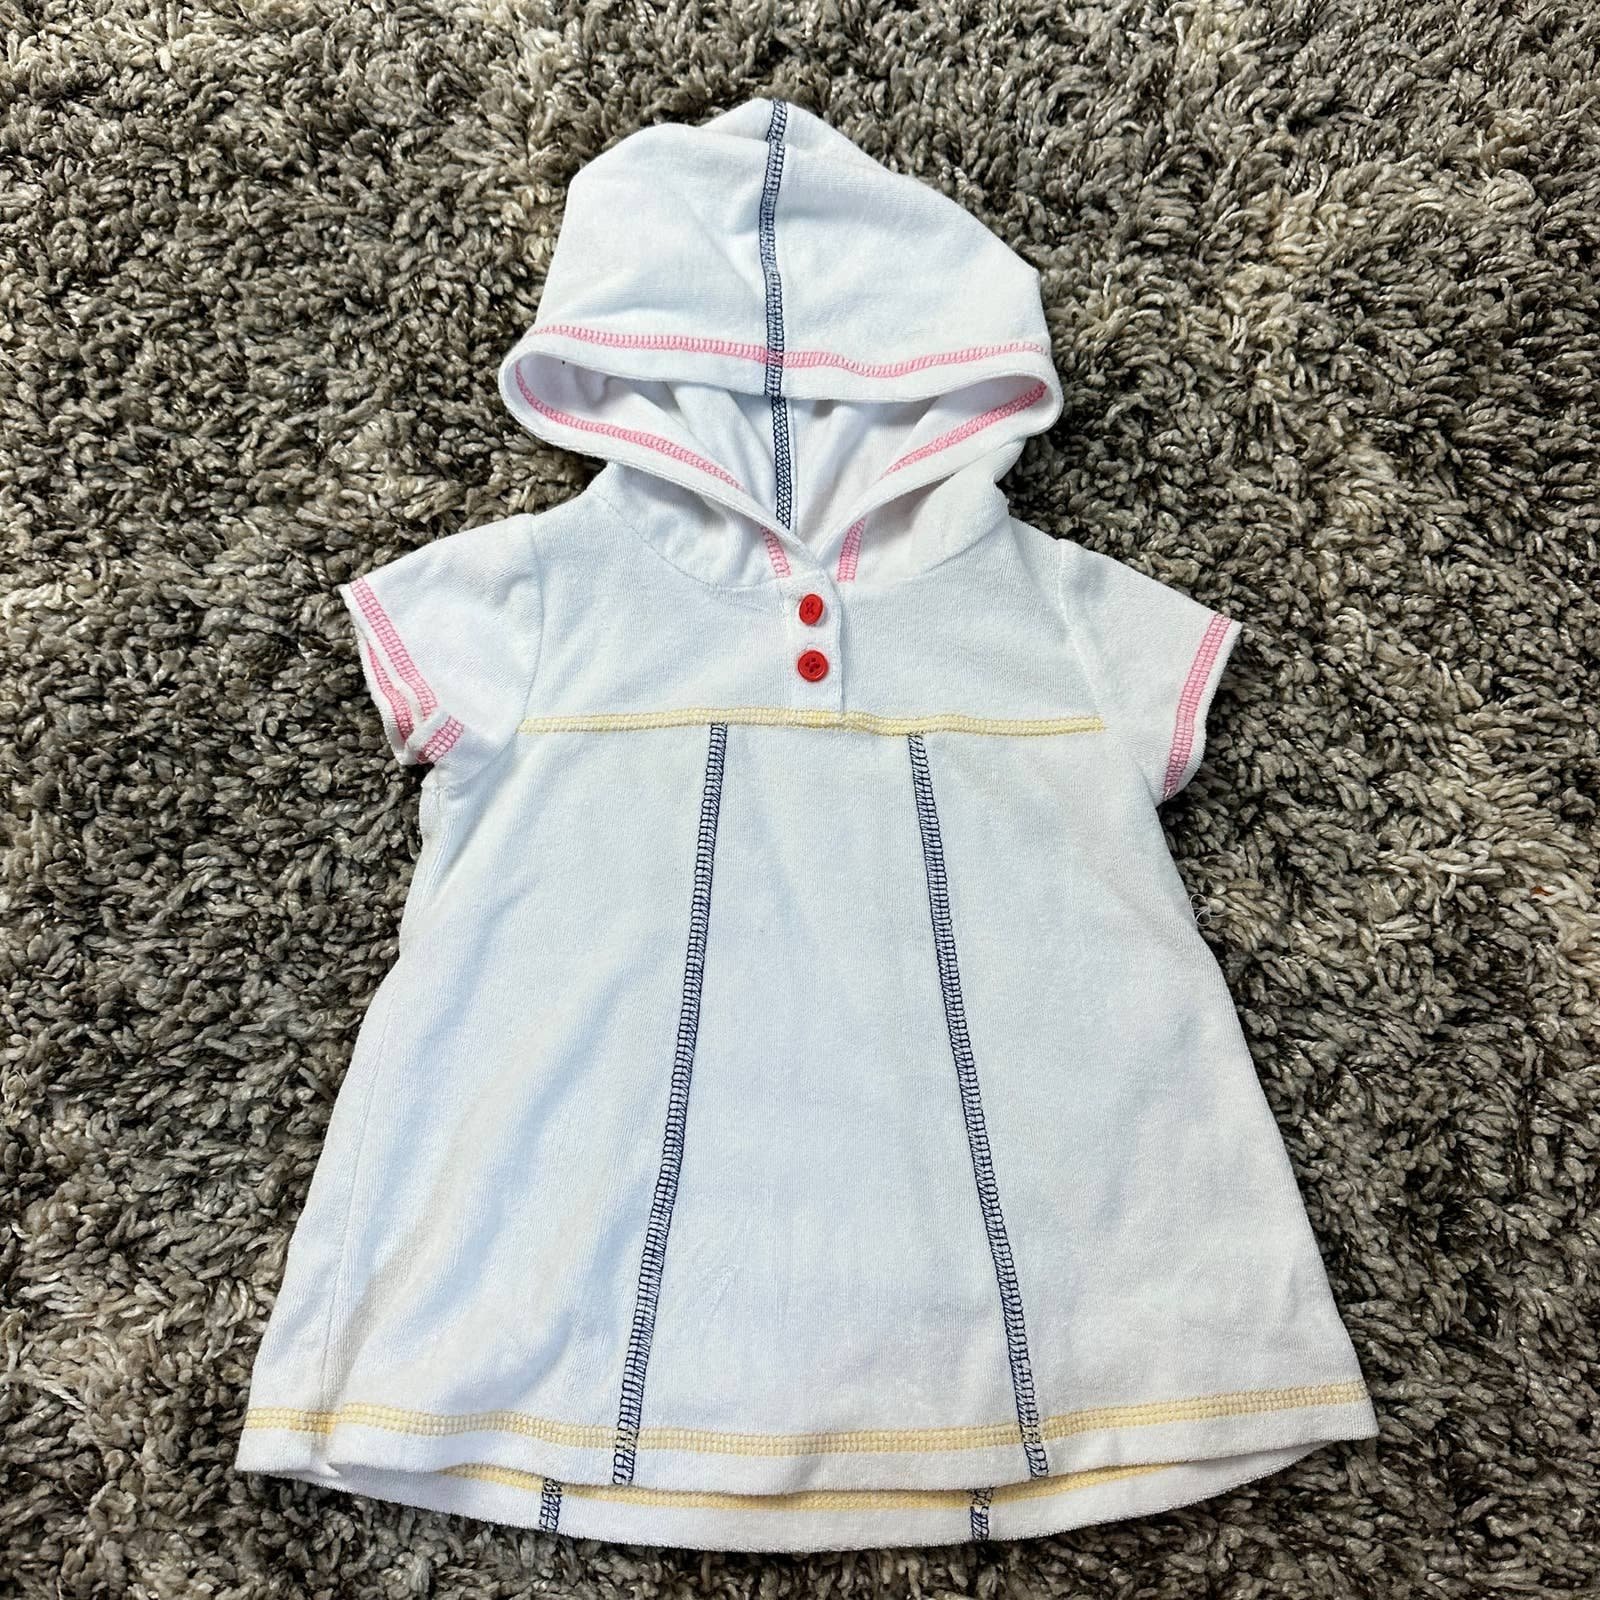 Hanna Andersson Toweling Hoodie Swim Coverup Dress Terrycloth Baby 6-12 Months ituW5H5T9